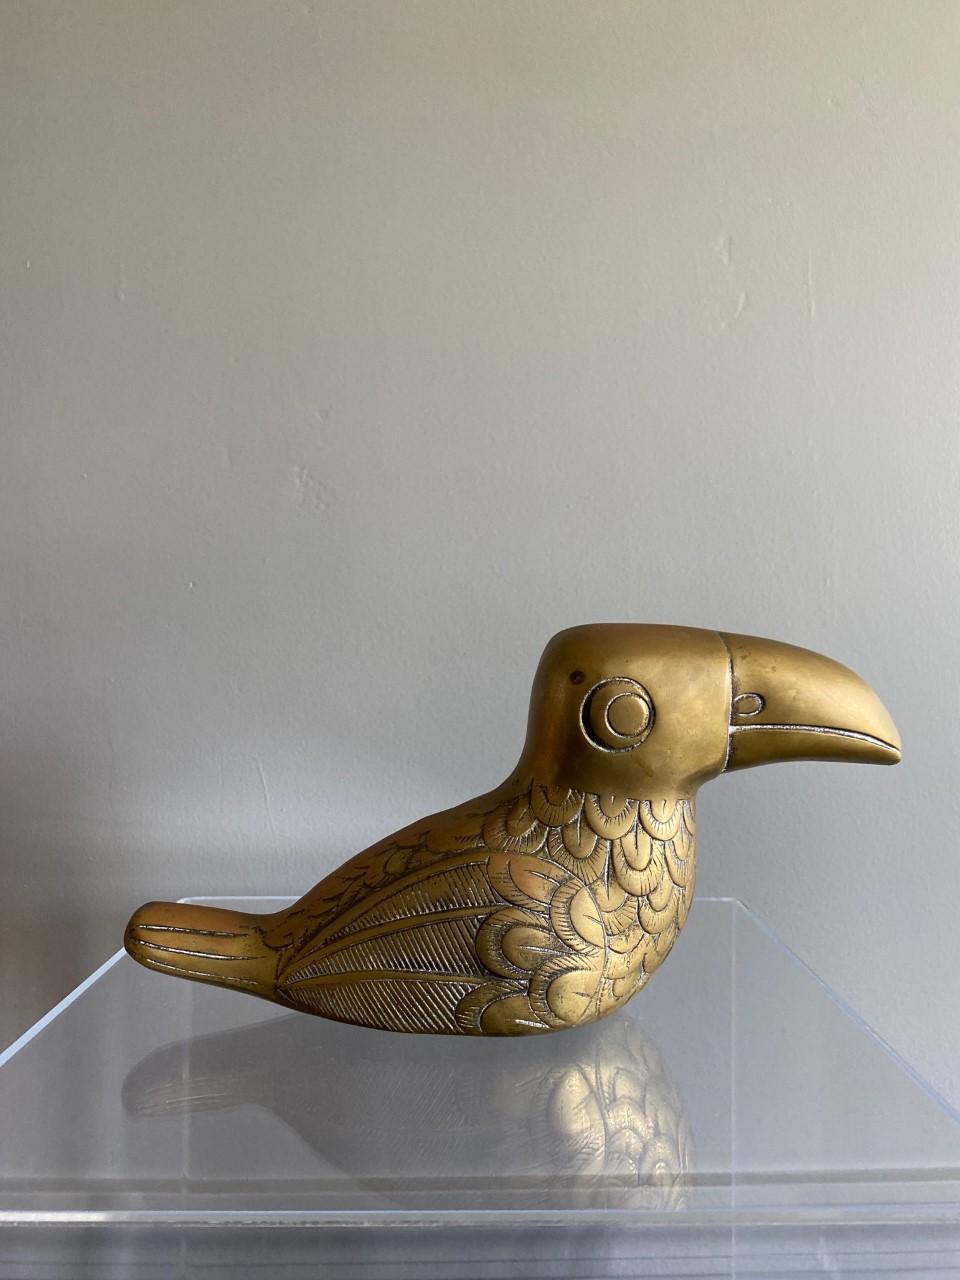 Beautiful brass toucan sculpture. This piece is both whimsy and a signature of Mid Century décor. The piece has incredible detail: striking lines and arches that delineate the figure along with an enchanting expression that brings a pleasing